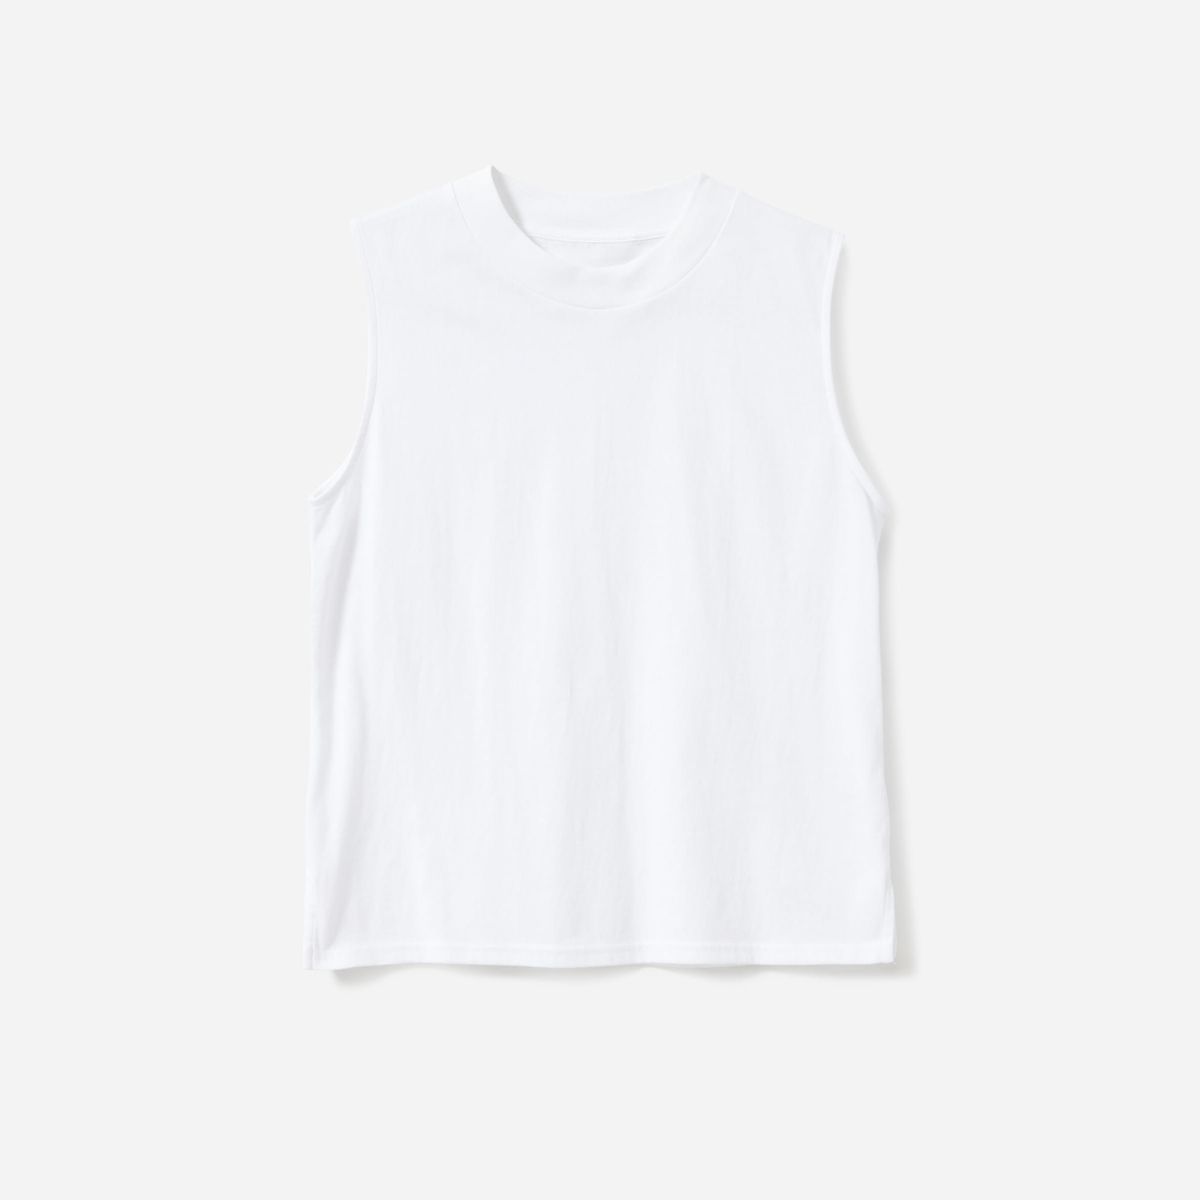 Details about   I Like To Lift Lifting Is My Favorite Womens White Tank Top